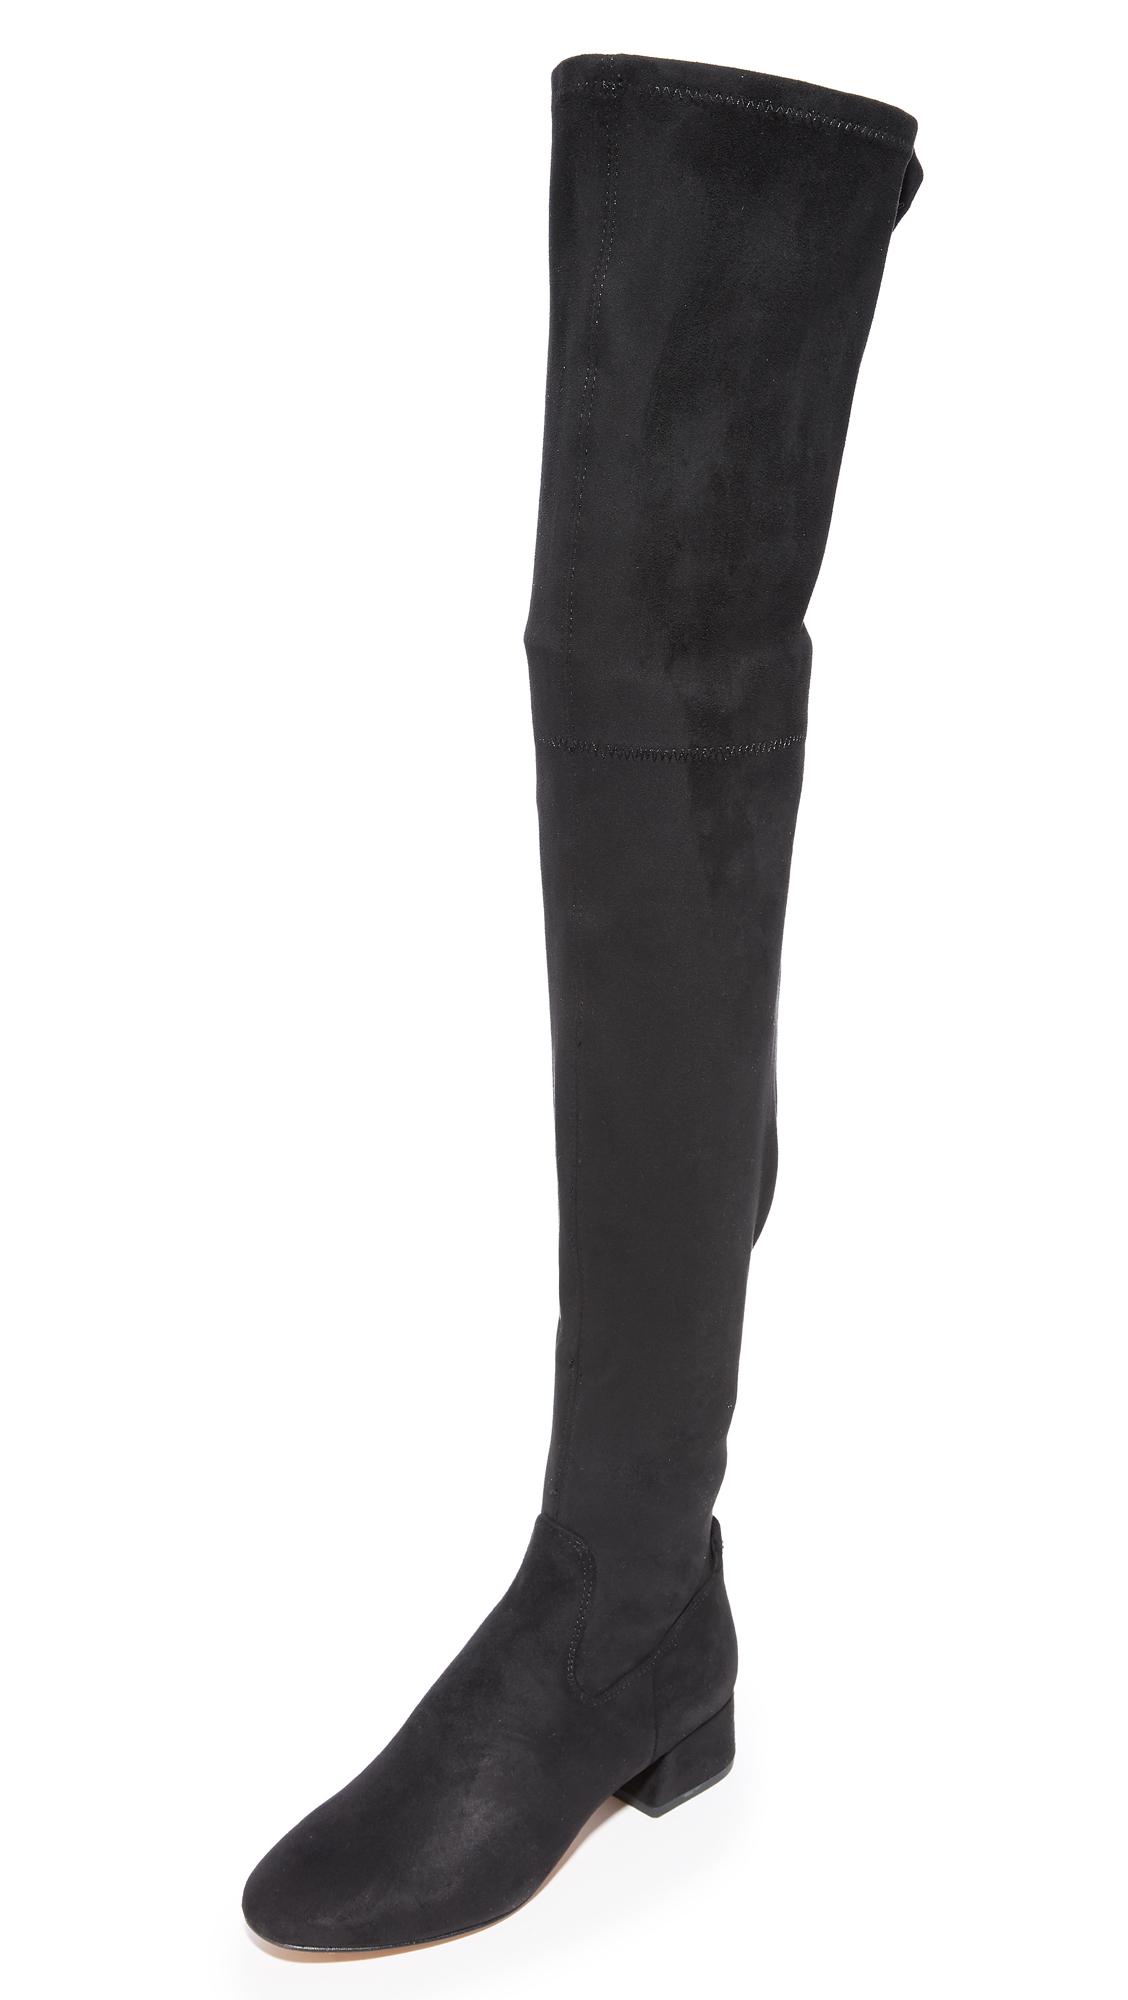 dolce vita over the knee boots jimmy